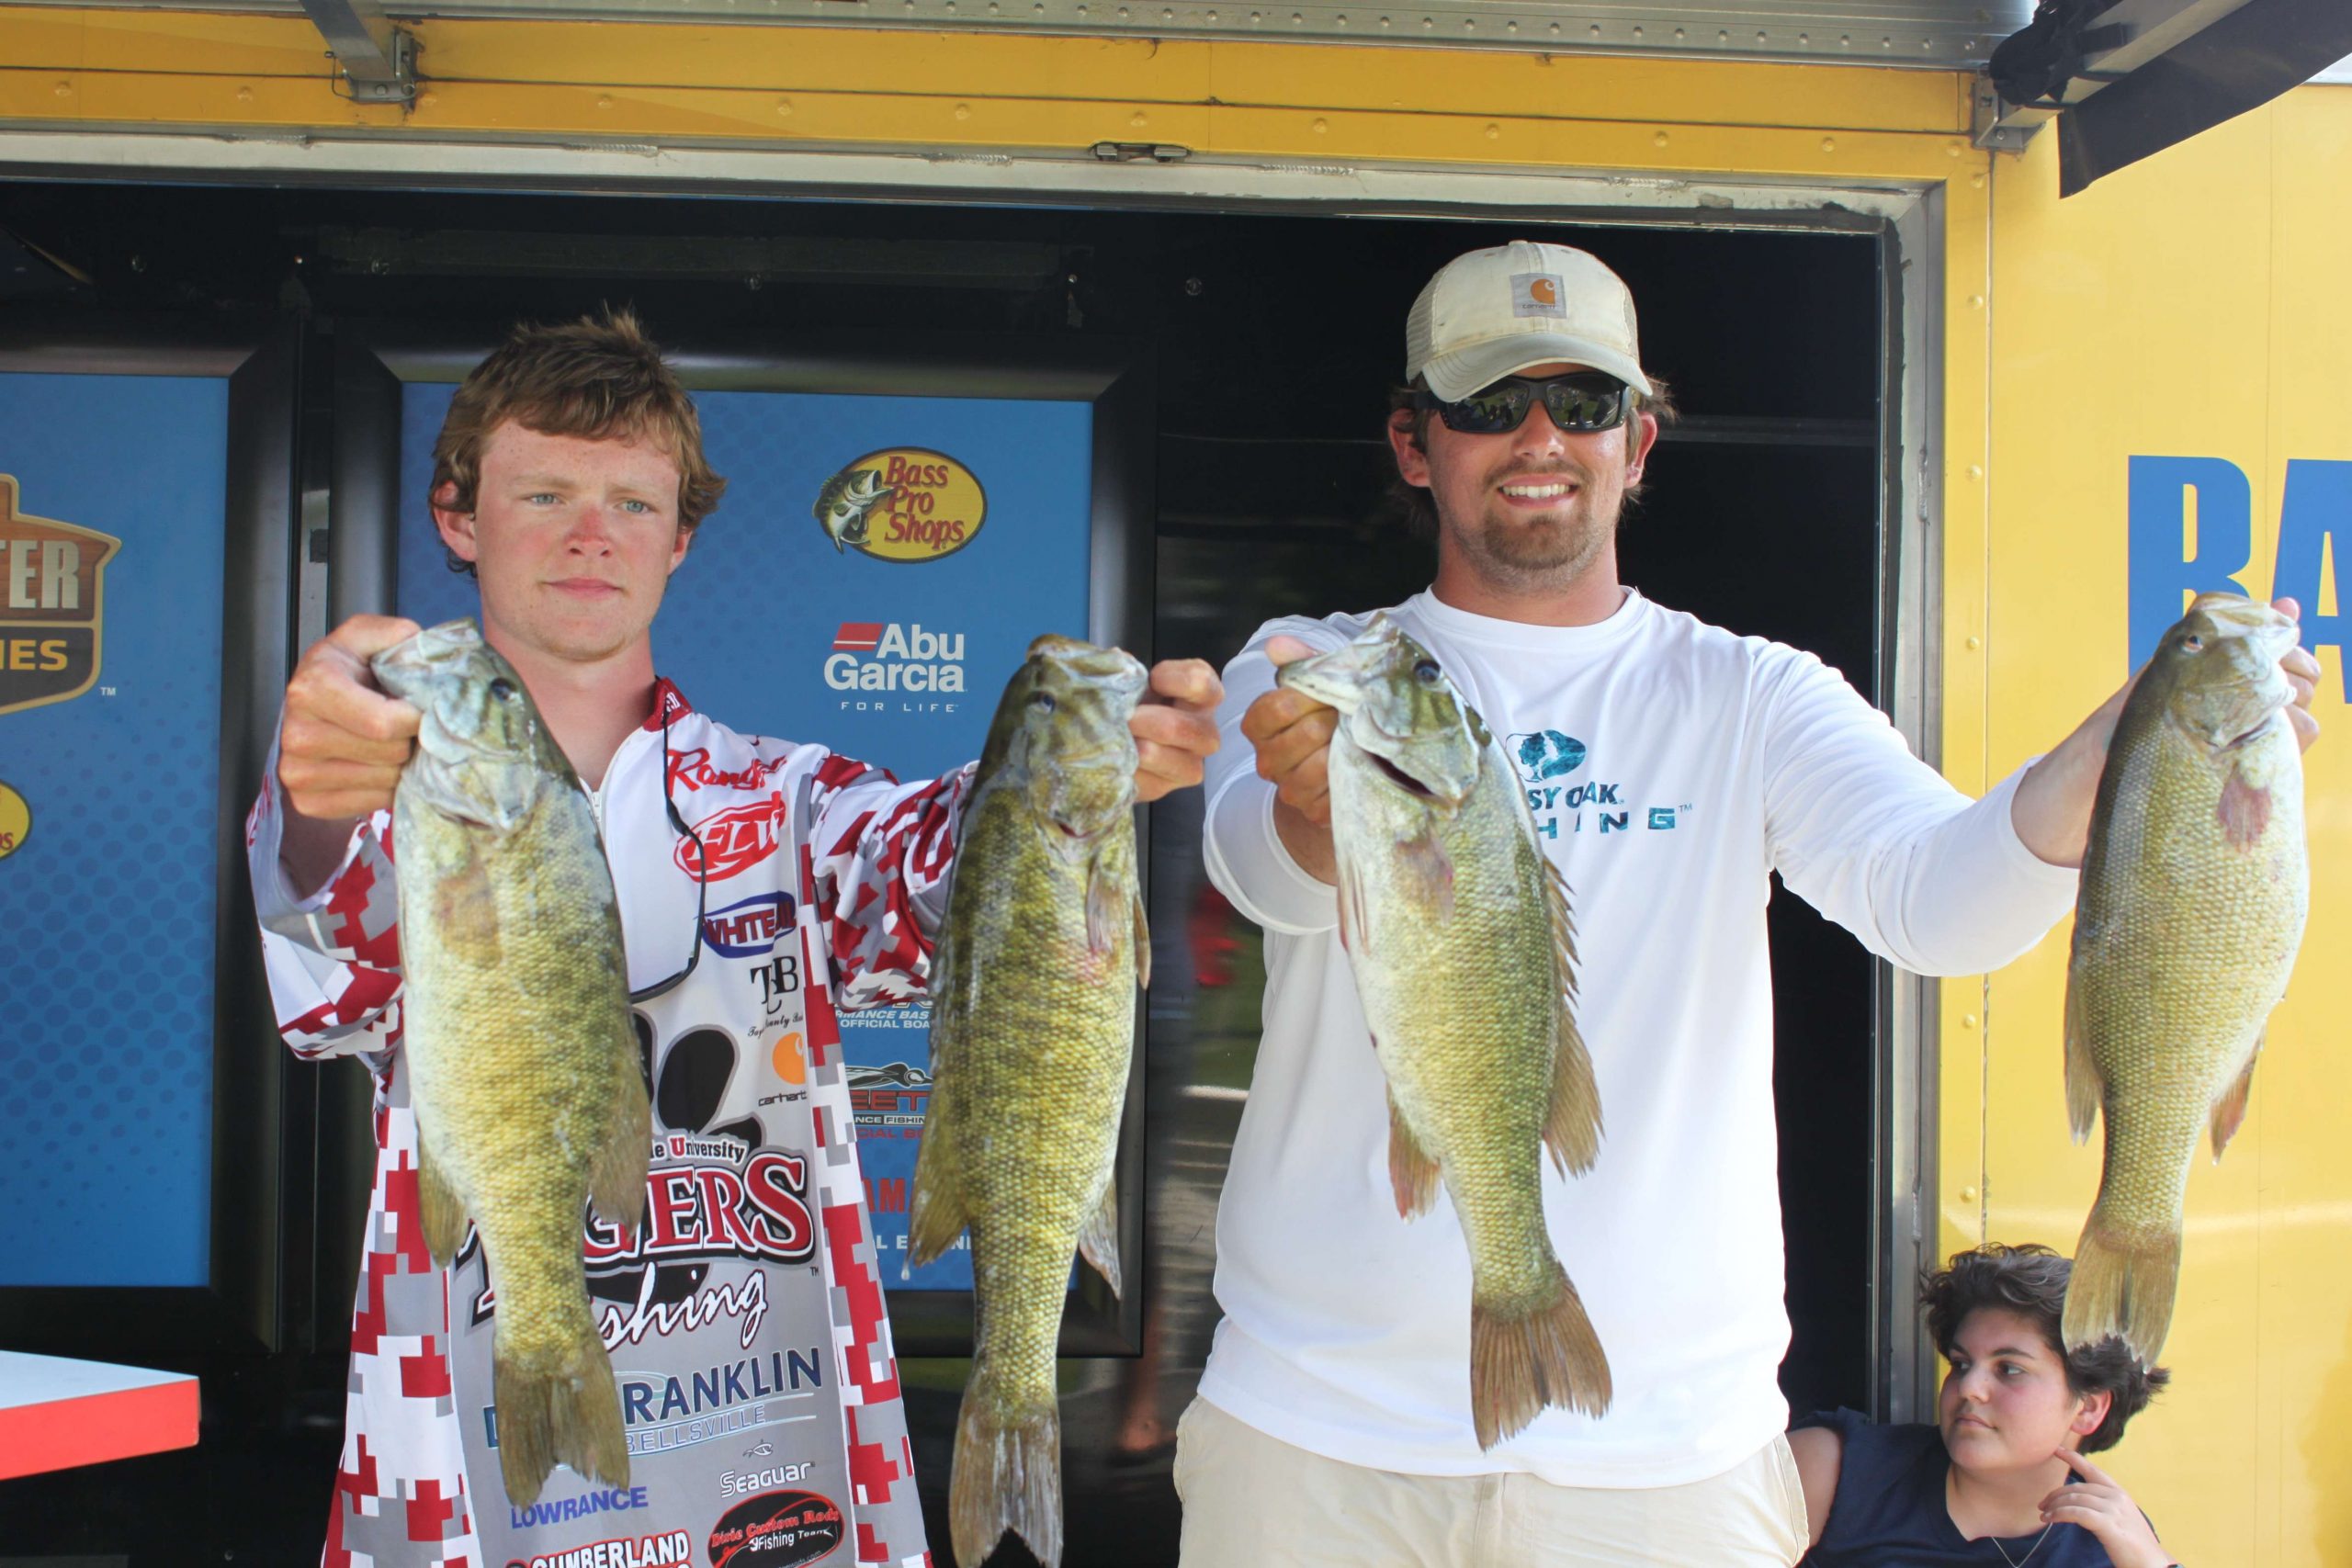 Bradley Dunagan and Nick Ratliff of Campbellsville University are in 27th place 23-15.